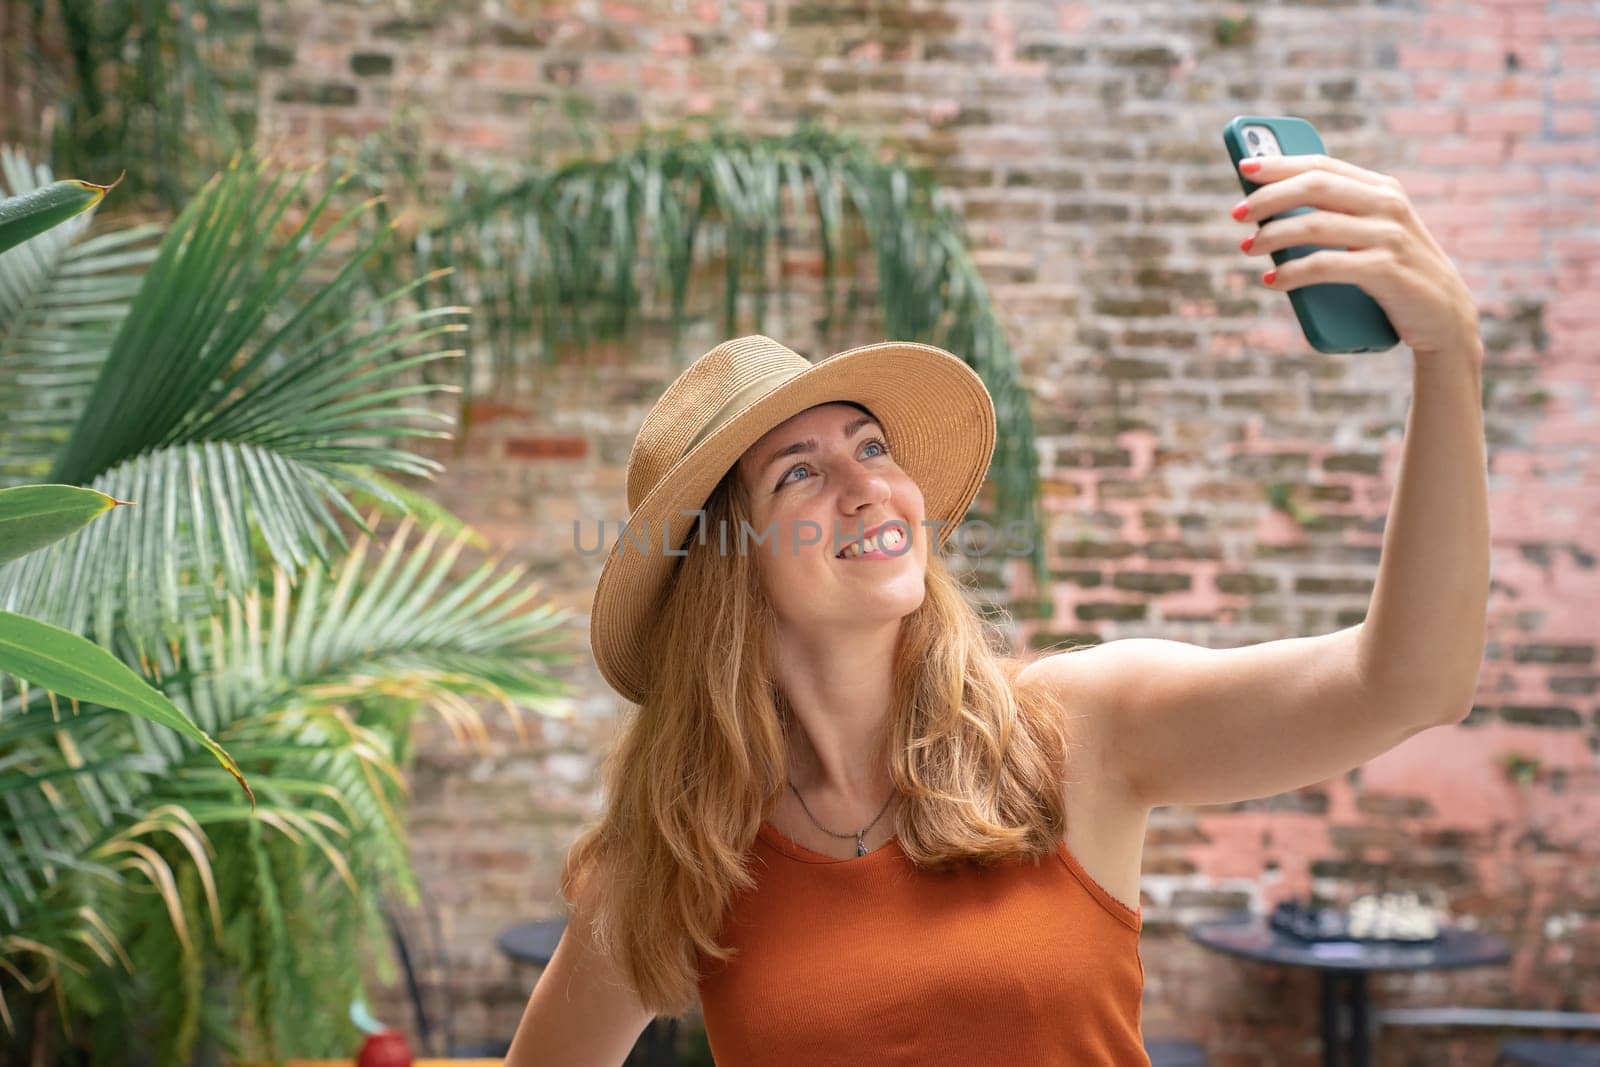 Woman in a sun hat smiles while taking a selfie with her cell phone by PaulCarr